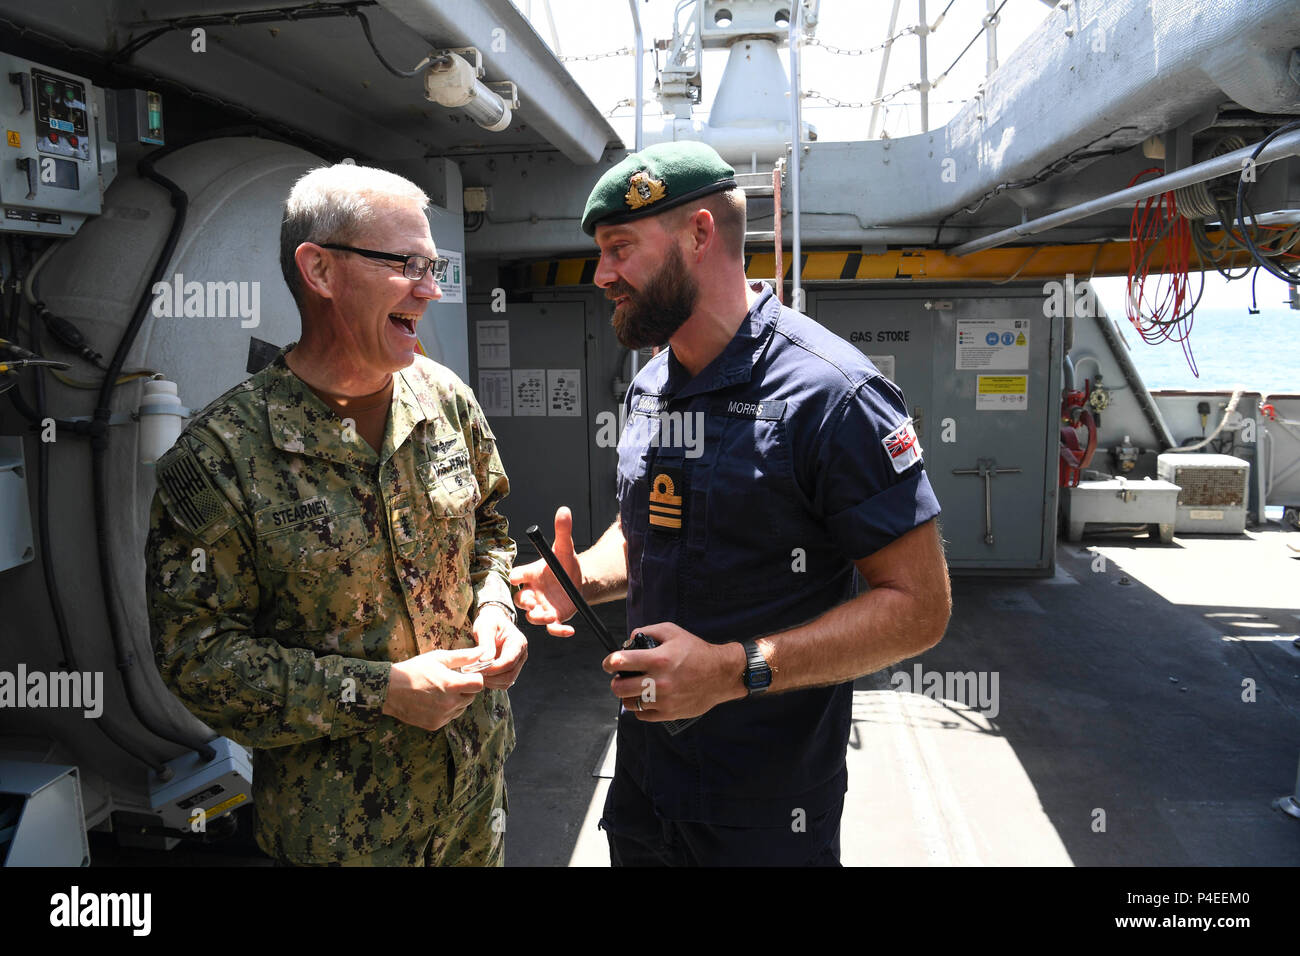 180617-N-TB177-0101 ARABIAN GULF (June 17, 2018) Vice Adm. Scott Stearney, commander of U.S. Naval Forces Central Command, U.S. 5th Fleet, Combined Maritime Forces, left, speaks with Lt. Commander Daniel Morris, aboard HMS Middleton during Mine Countermeasures Exercise (MCMEX) 18-2. The bilateral exercise enhances cooperation, mutual MCM capabilities and interoperability between the U.S. and U.K., demonstrating the shared commitment of ensuring unfettered operations of naval and support vessels, as well as commercial shipping movements, throughout the maritime domain. (U.S. Navy photo by Mass  Stock Photo